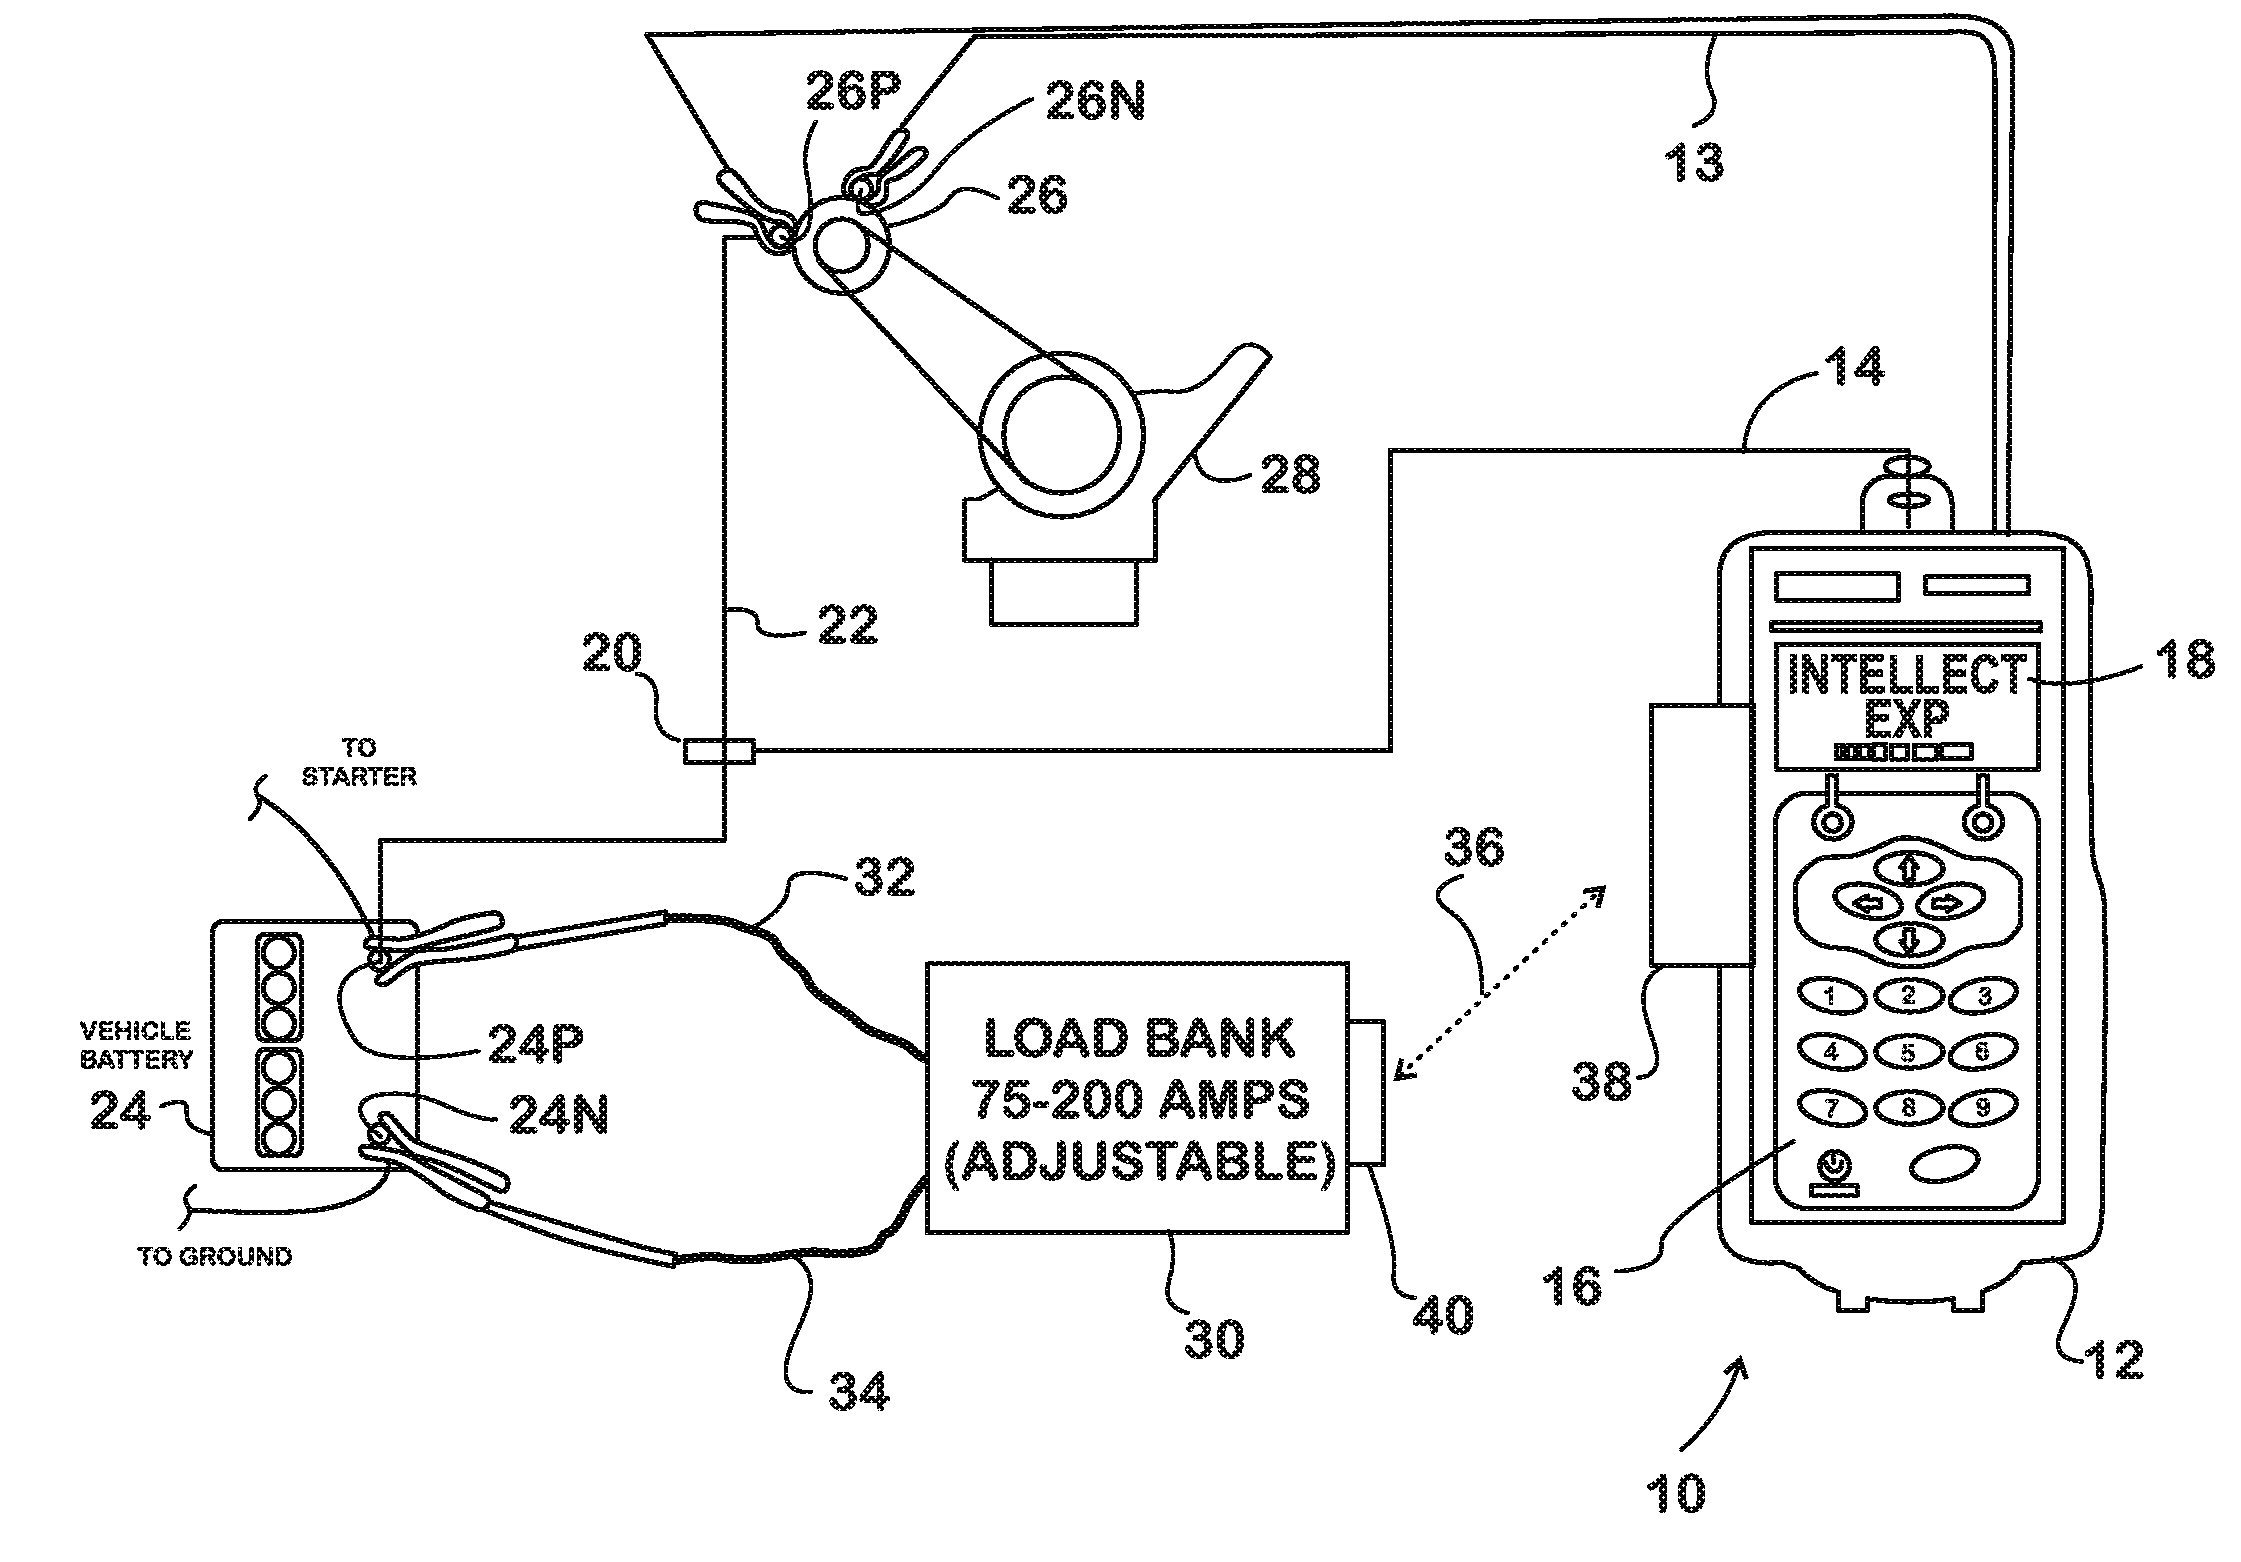 Electrical system testing using a wireless-controlled load bank